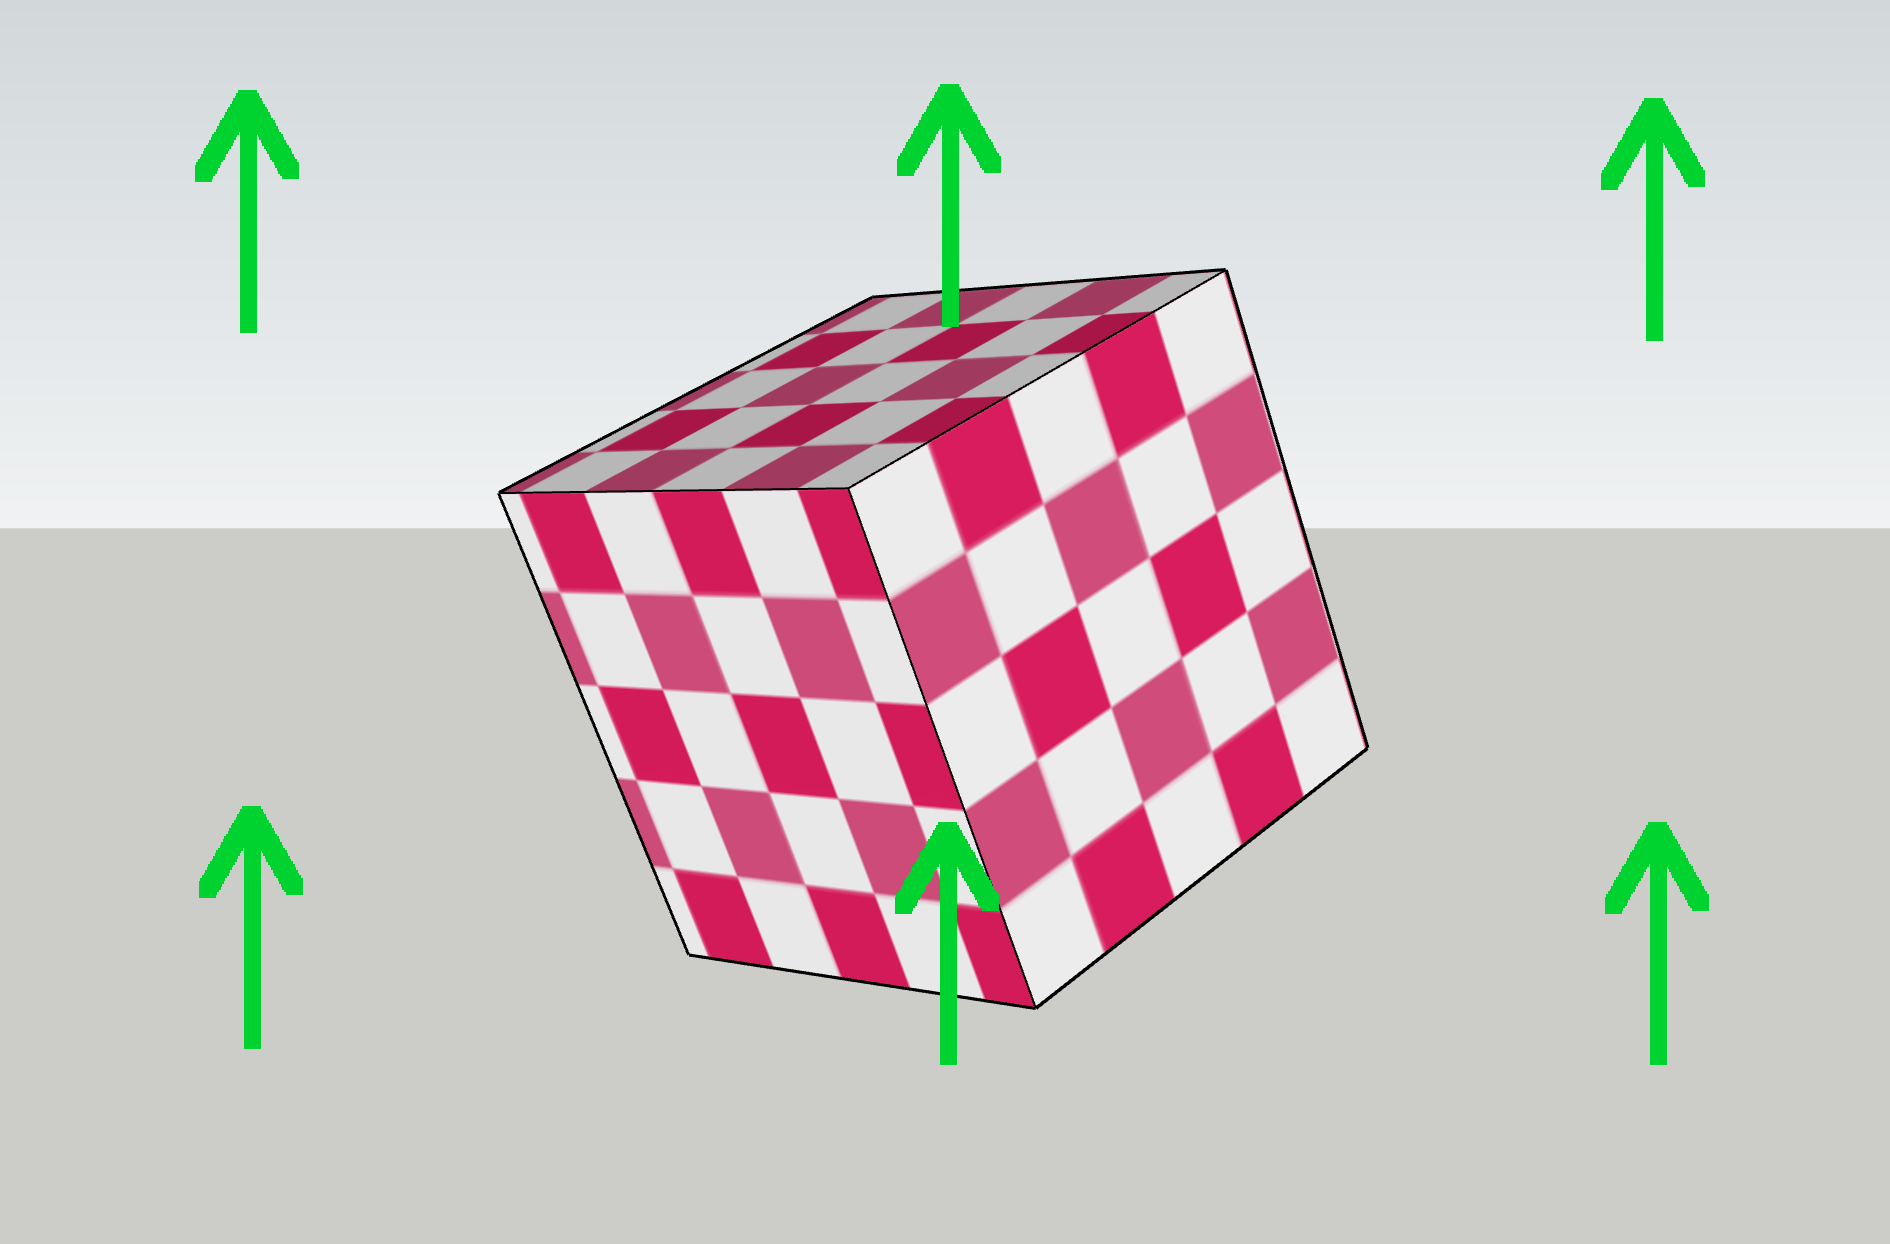 A diagram of a cube, with green arrows pointing up in view space